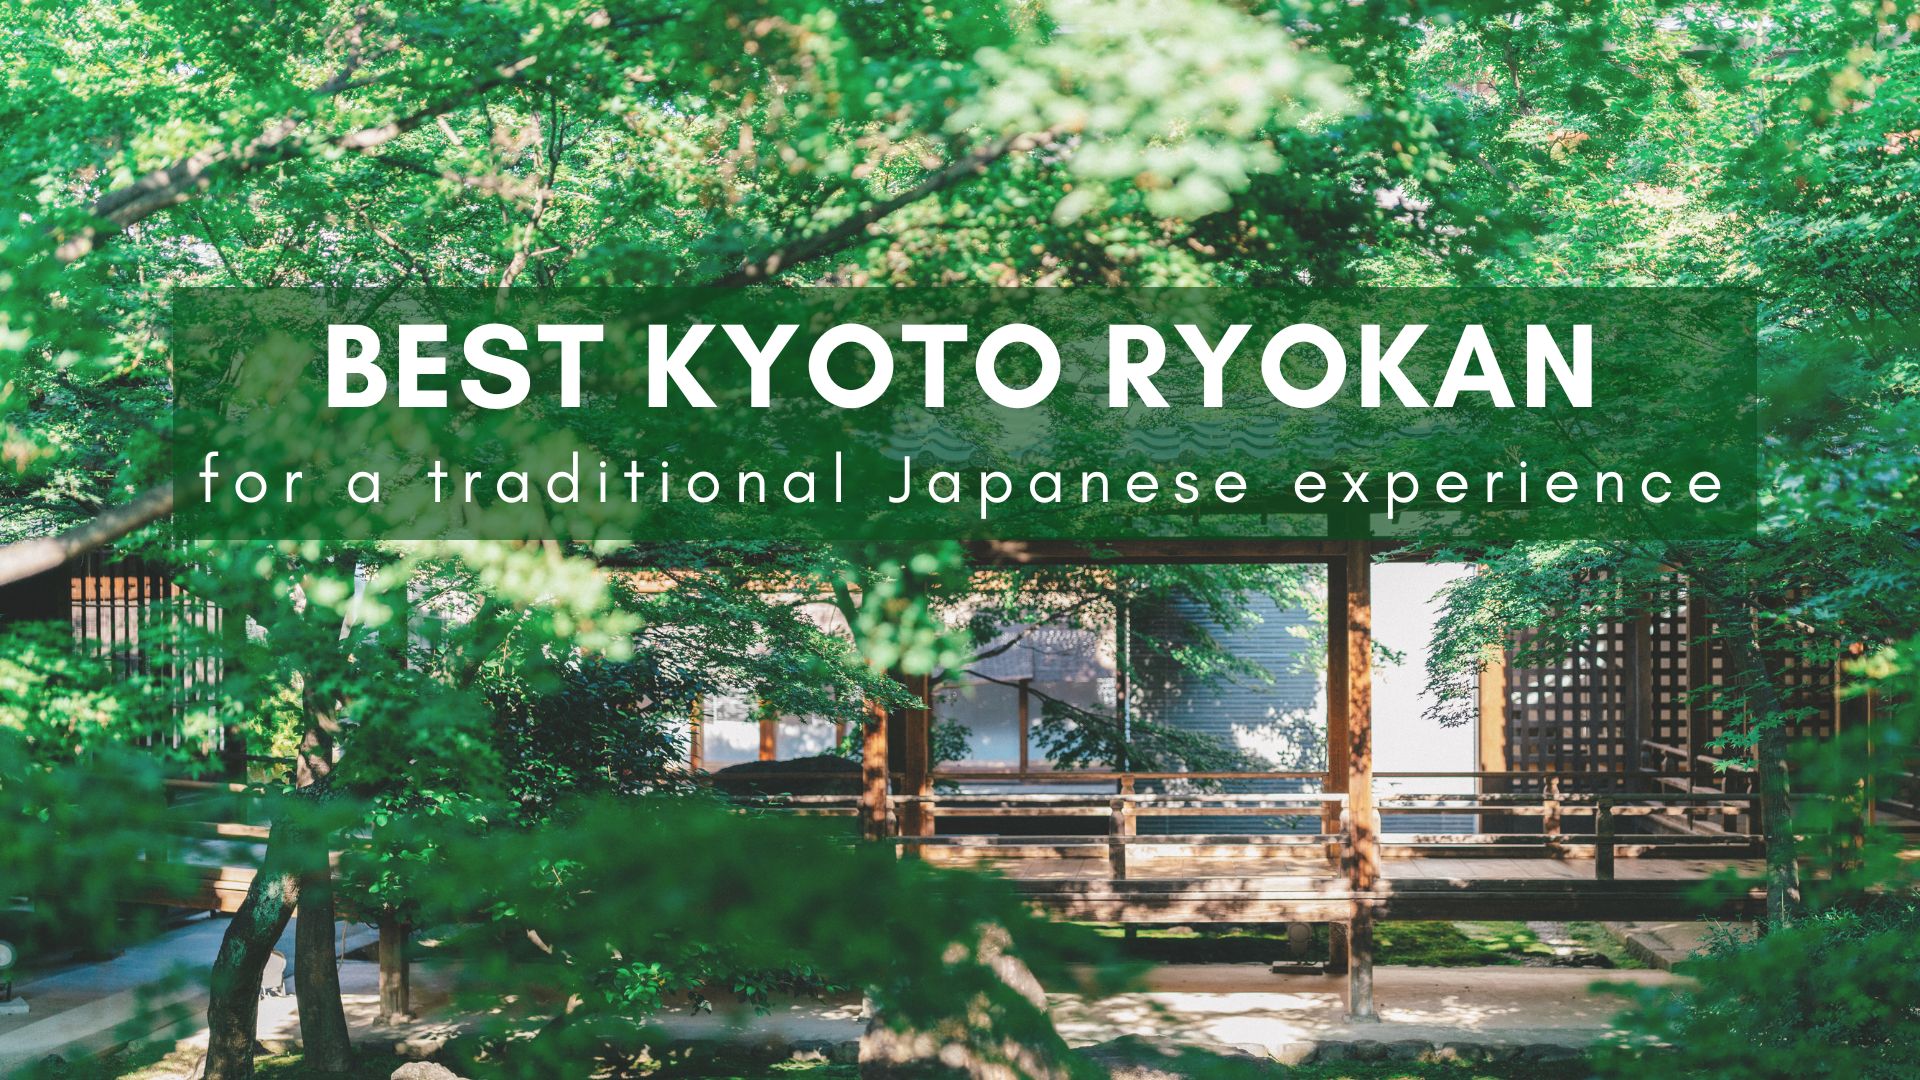 Kyoto ryokan, where to stay in a ryokan in Kyoto, Best Kyoto ryokan stays, amazing traditional ryokan in Kyoto, traditional Japanese accommodation in Kyoto, best Kyoto ryokan